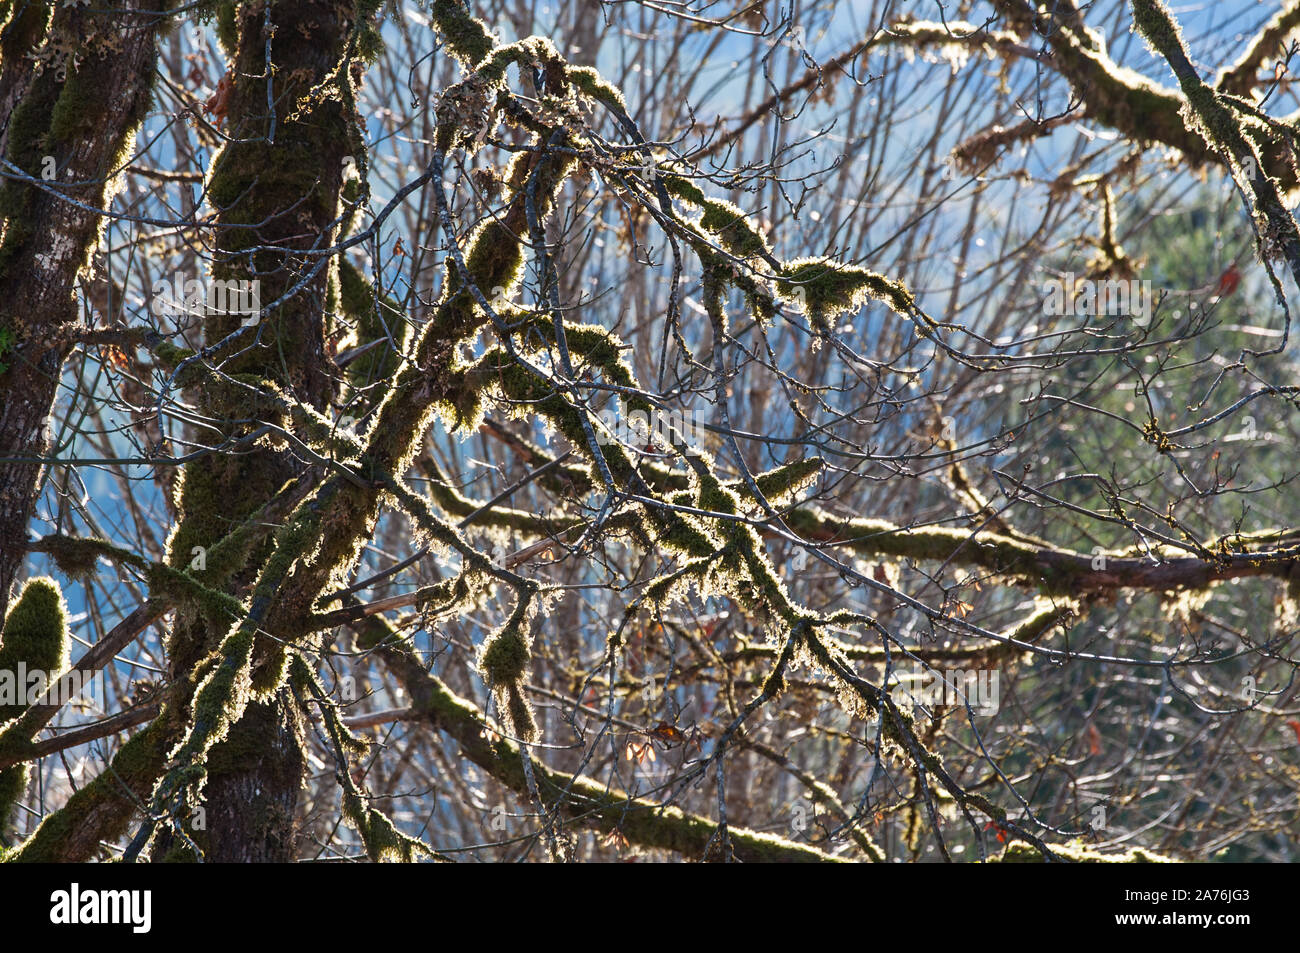 Nature moss backlit on tree branches in this beautiful forest landscape photo. Stock Photo